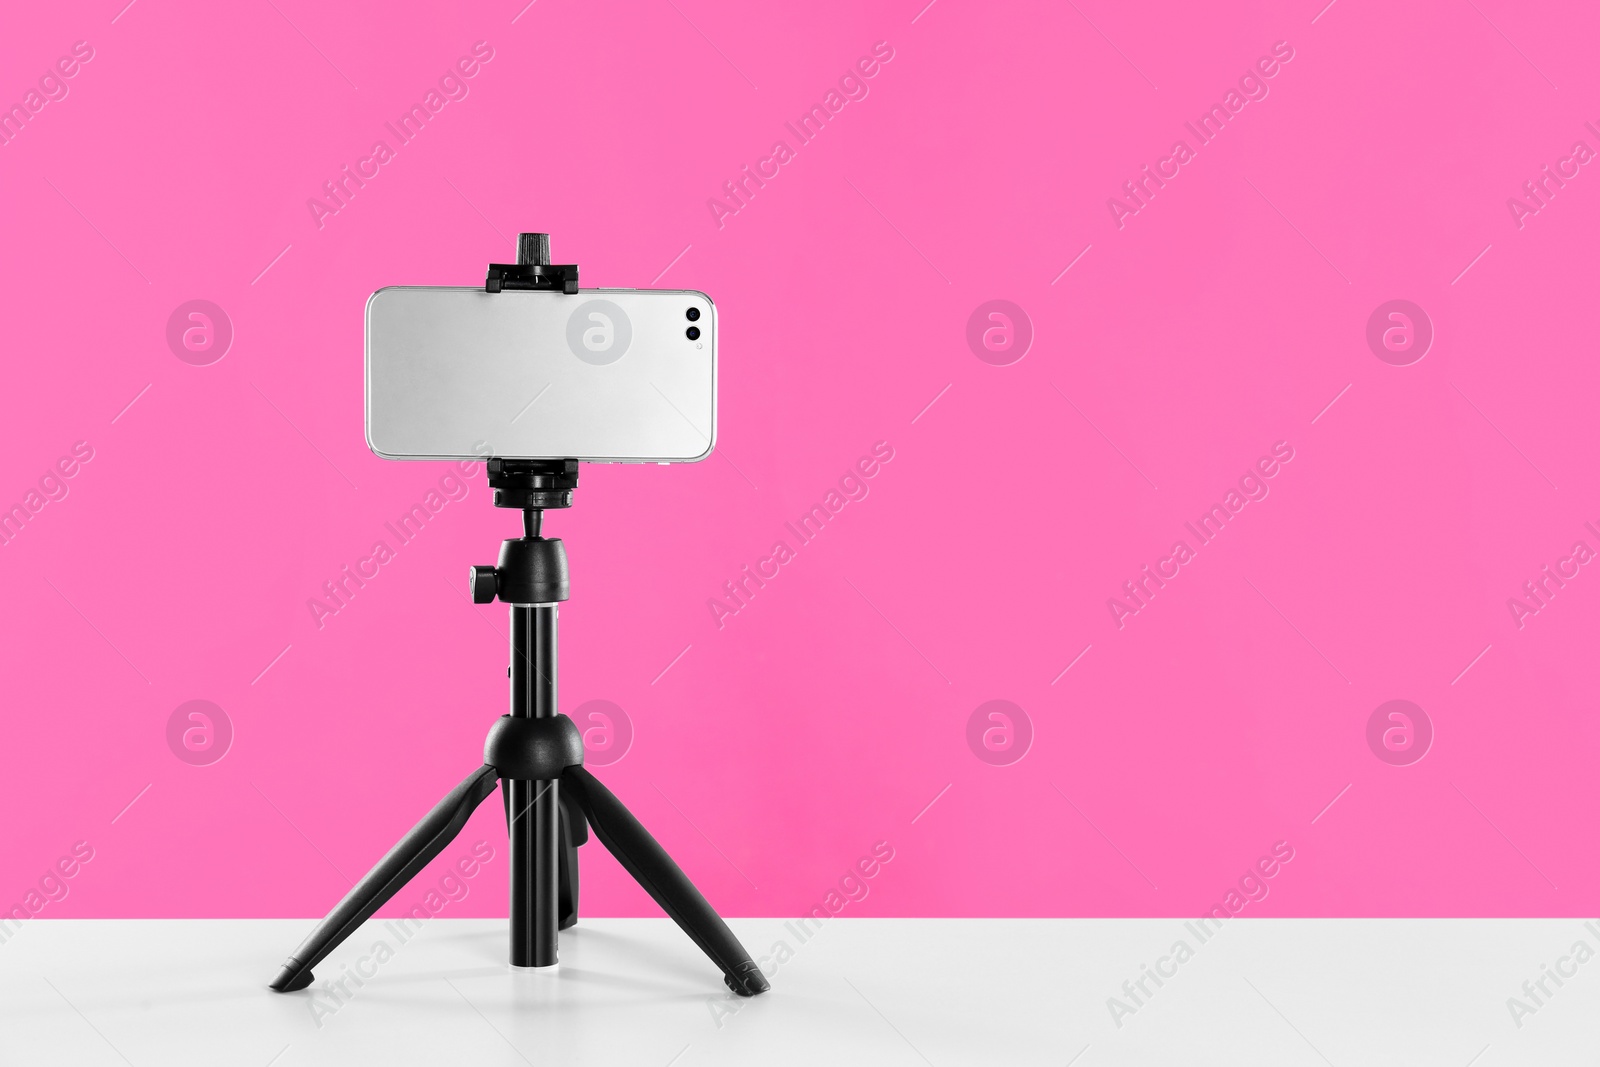 Photo of Smartphone fixed to tripod on white table against pink background. Space for text